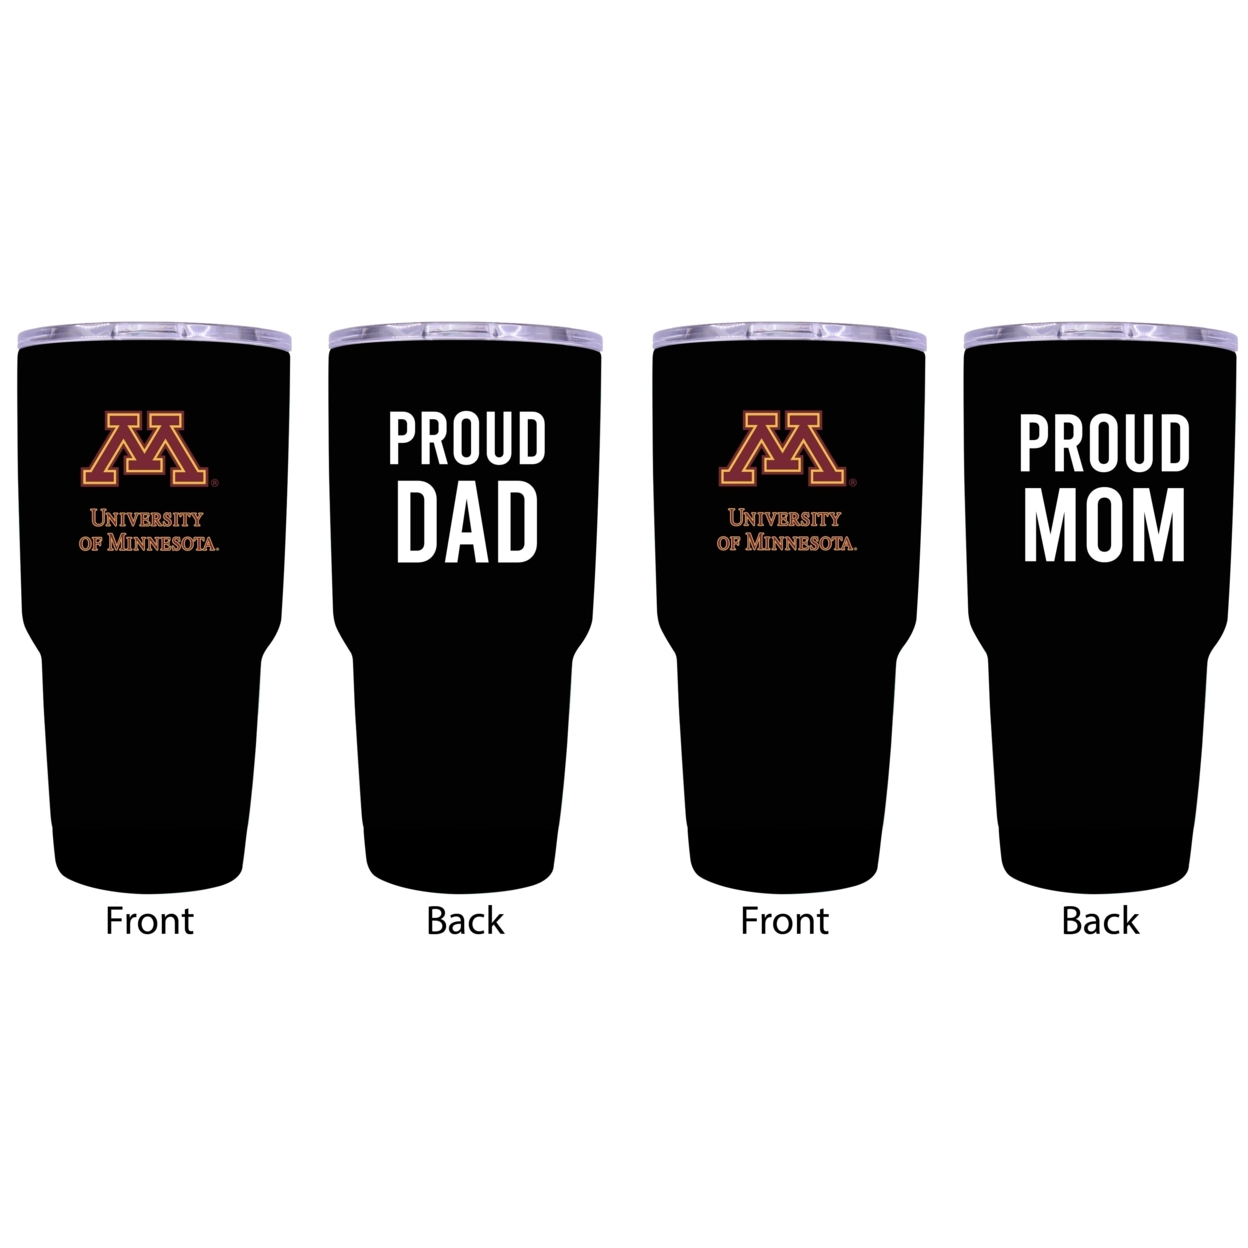 Minnesota Gophers Proud Mom And Dad 24 Oz Insulated Stainless Steel Tumblers 2 Pack Black.